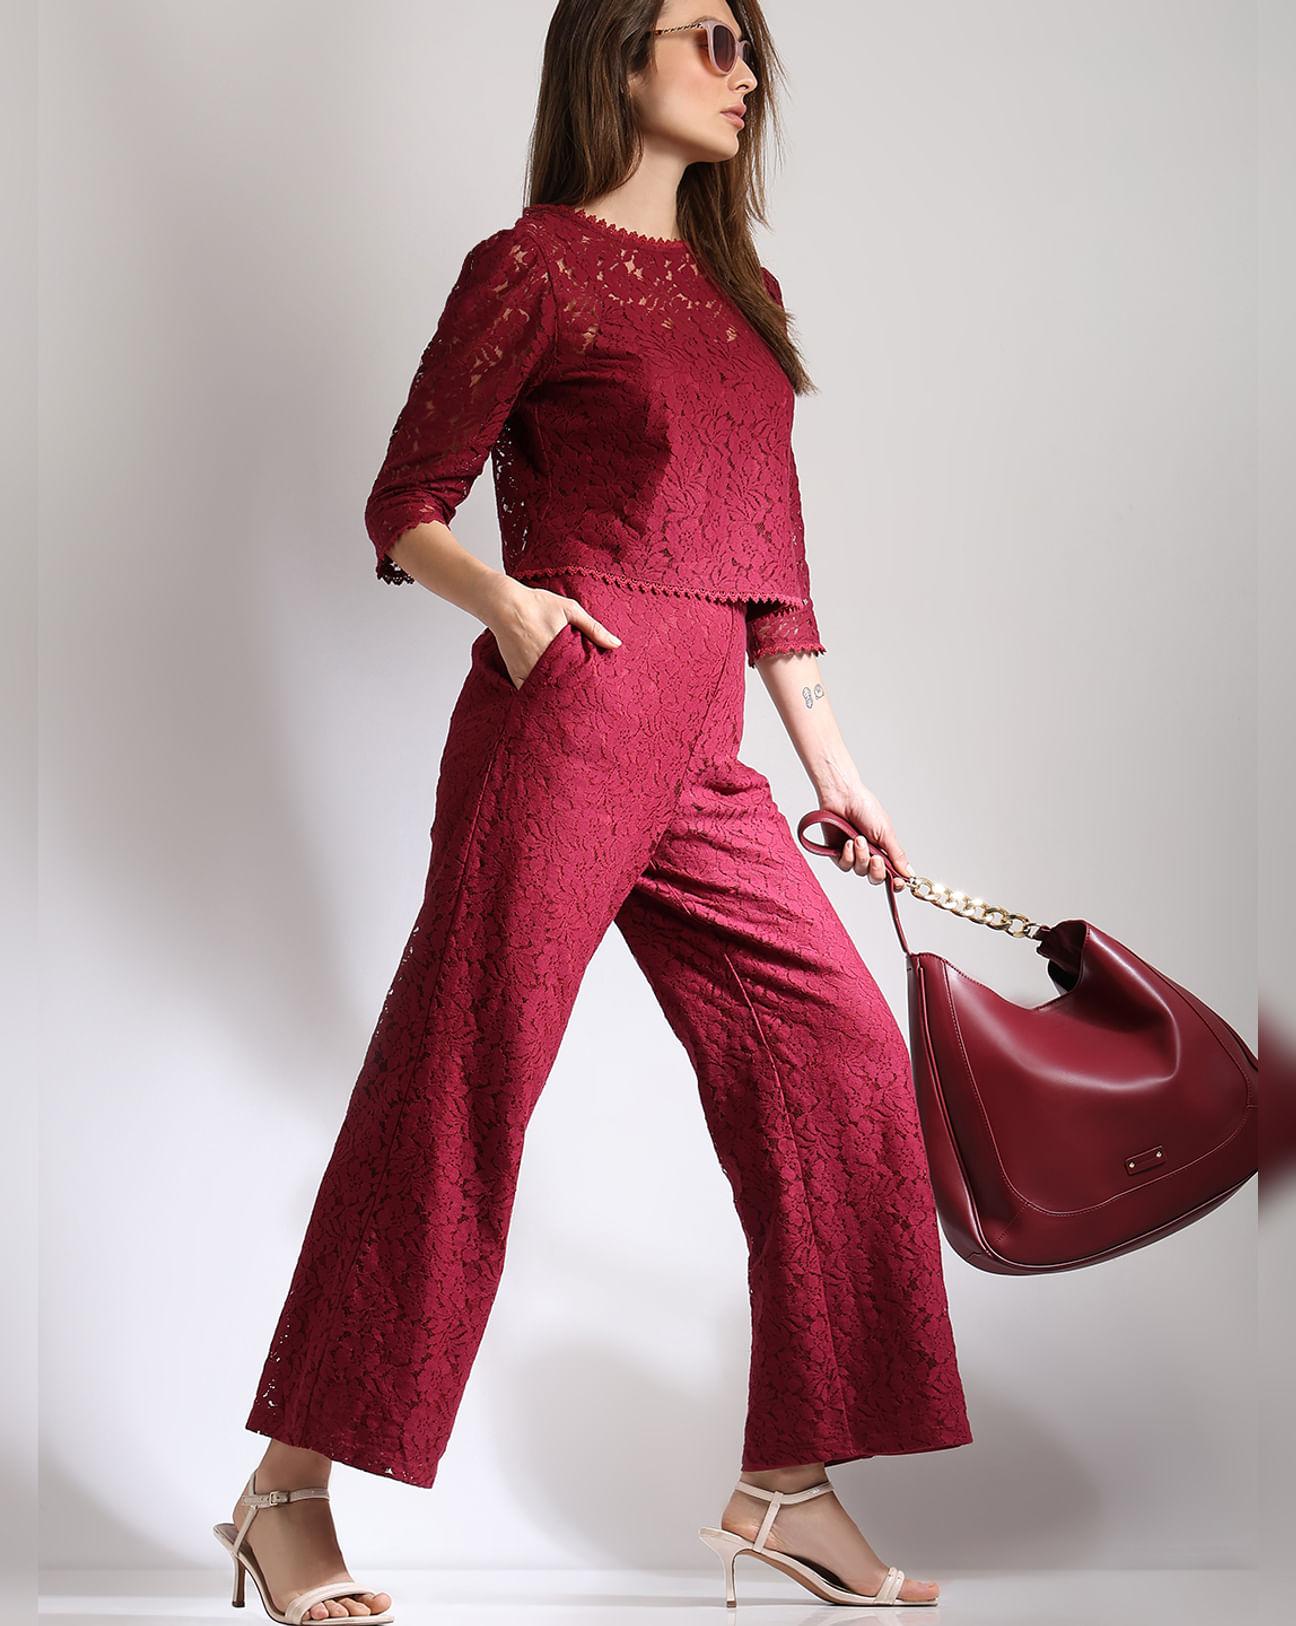 maroon high rise lace co-ord set pants